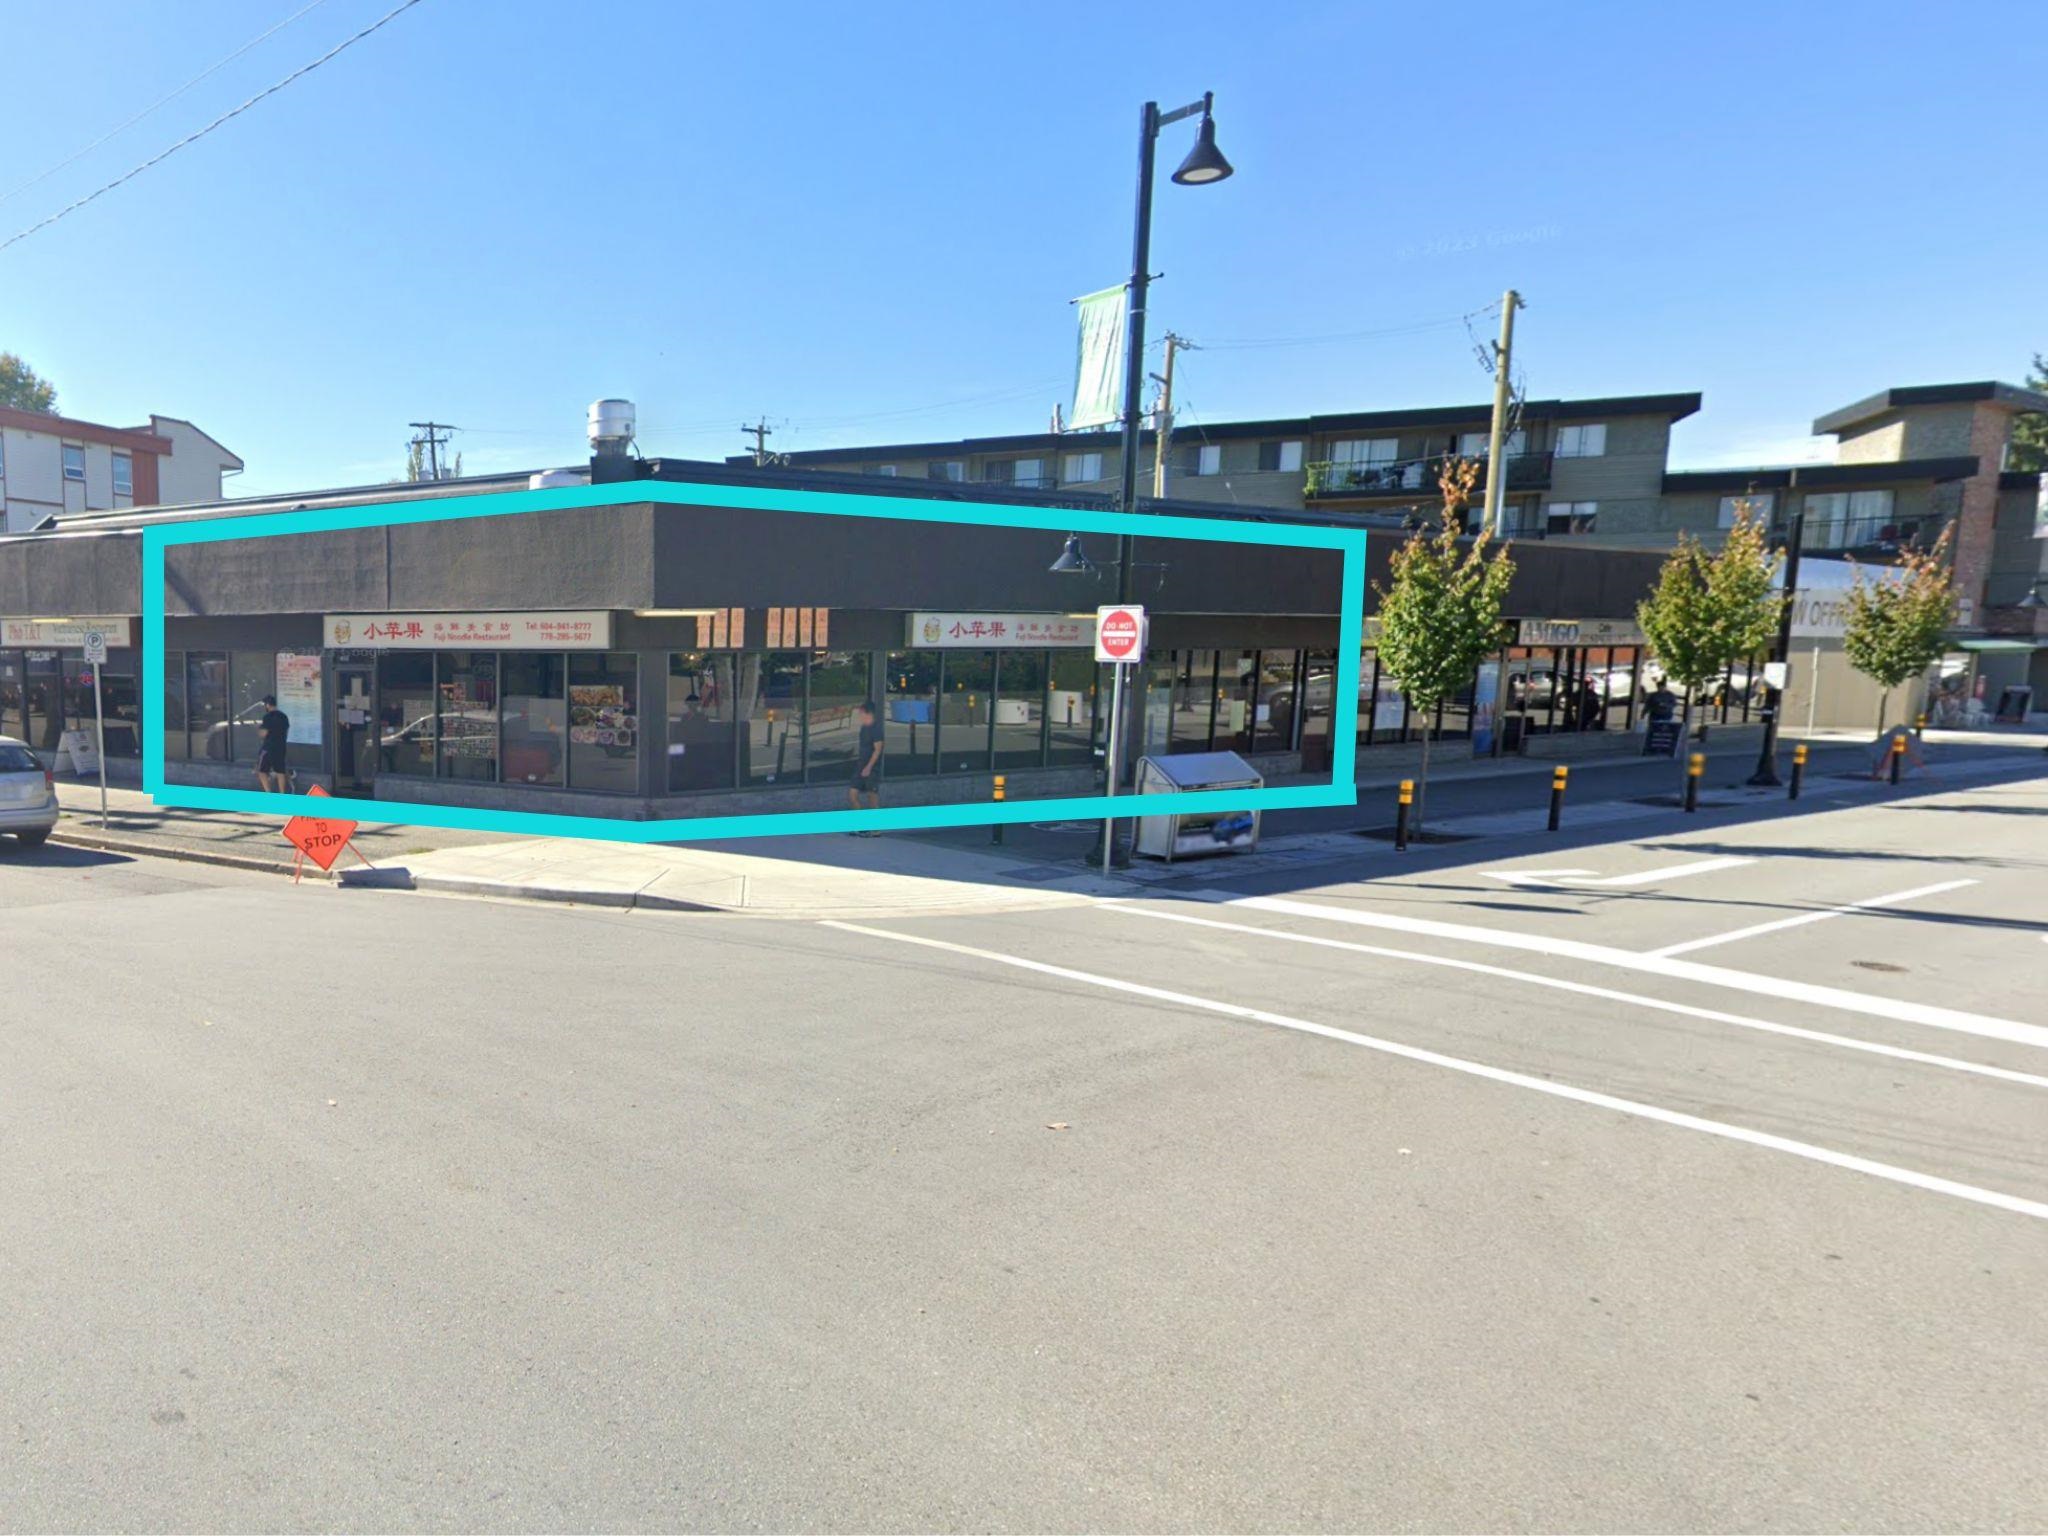 Central Pt Coquitlam Land Commercial for sale:    (Listed 6800-05-07)